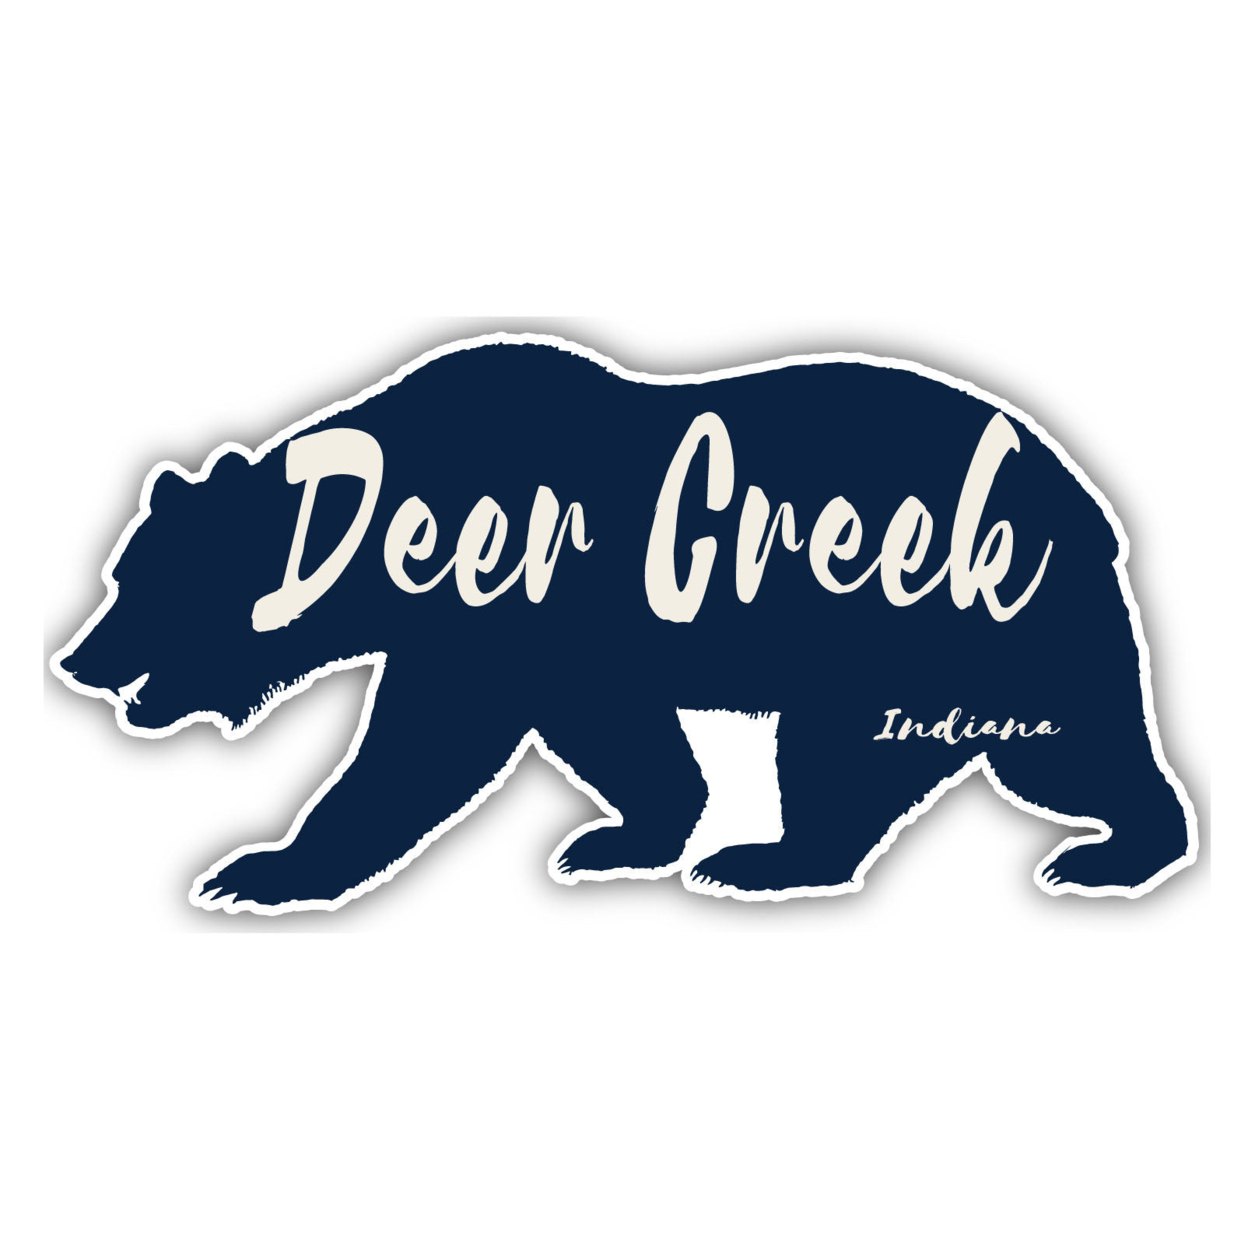 Deer Creek Indiana Souvenir Decorative Stickers (Choose Theme And Size) - 4-Pack, 6-Inch, Bear